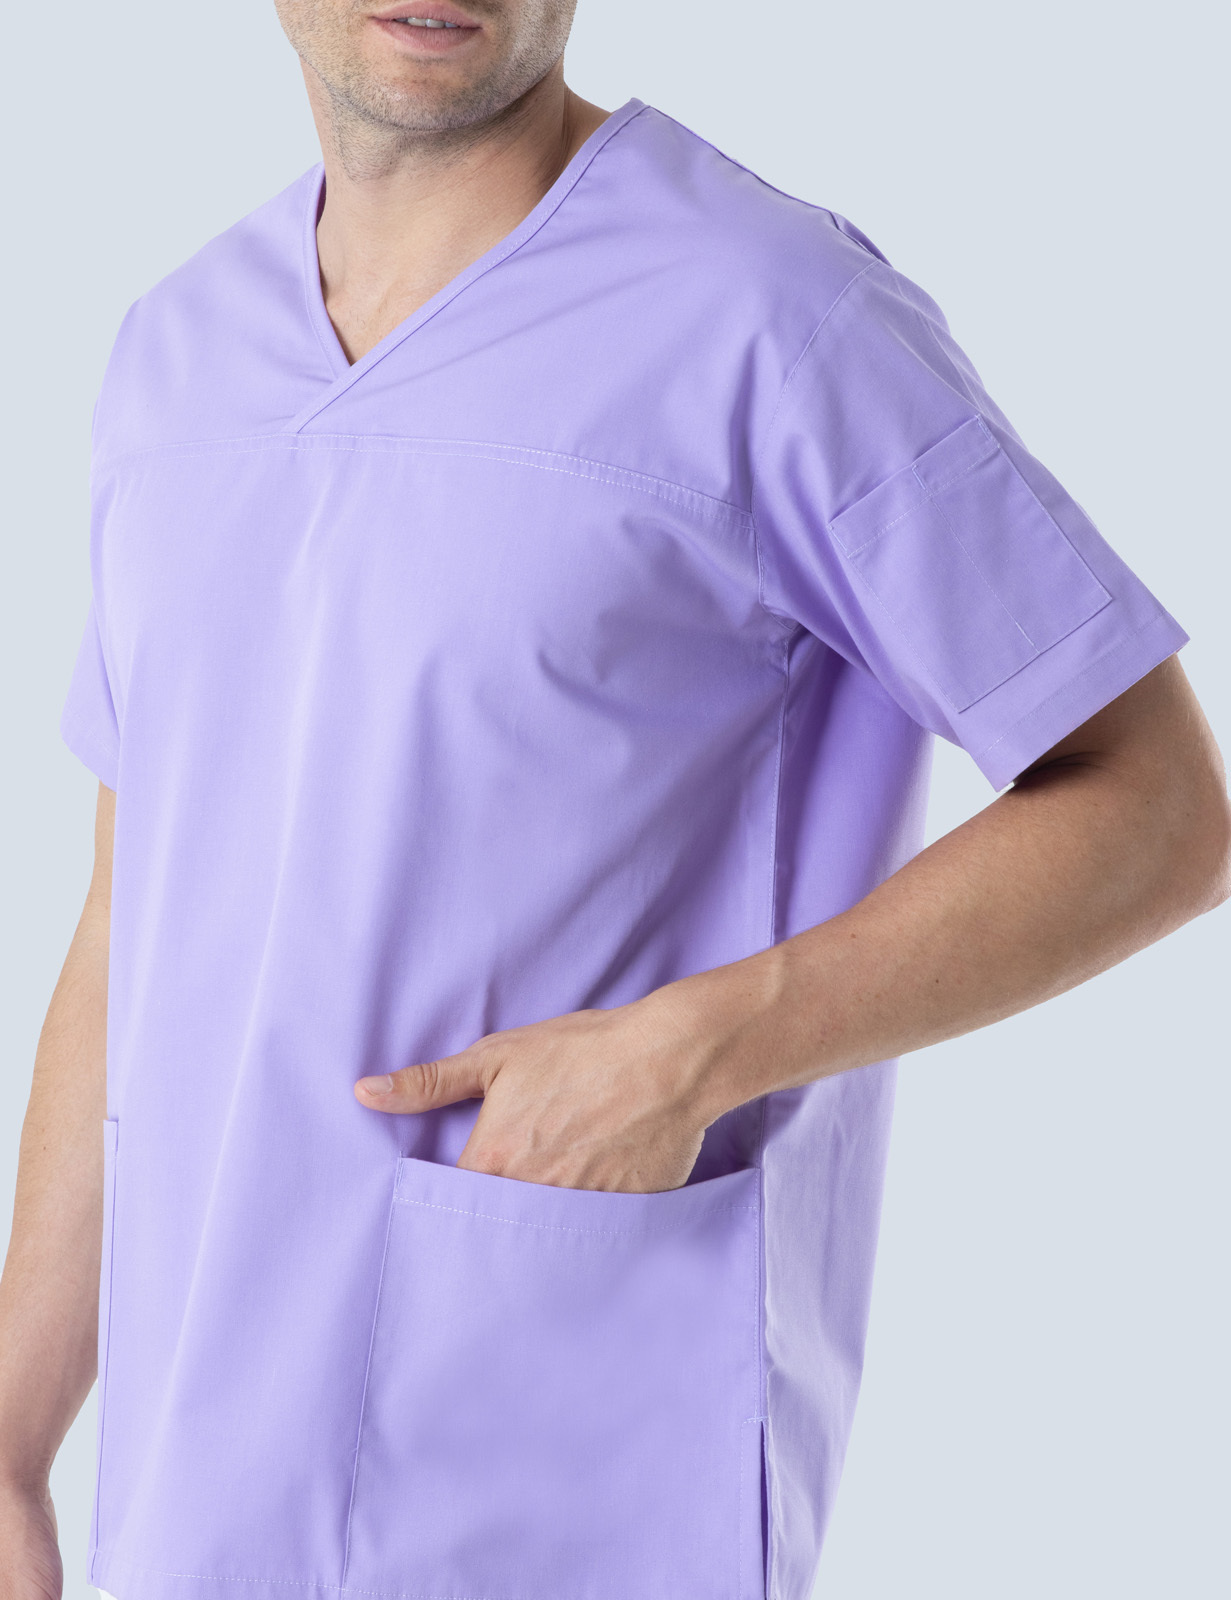 Men's Fit Solid Scrub Top - Lilac - 4X large